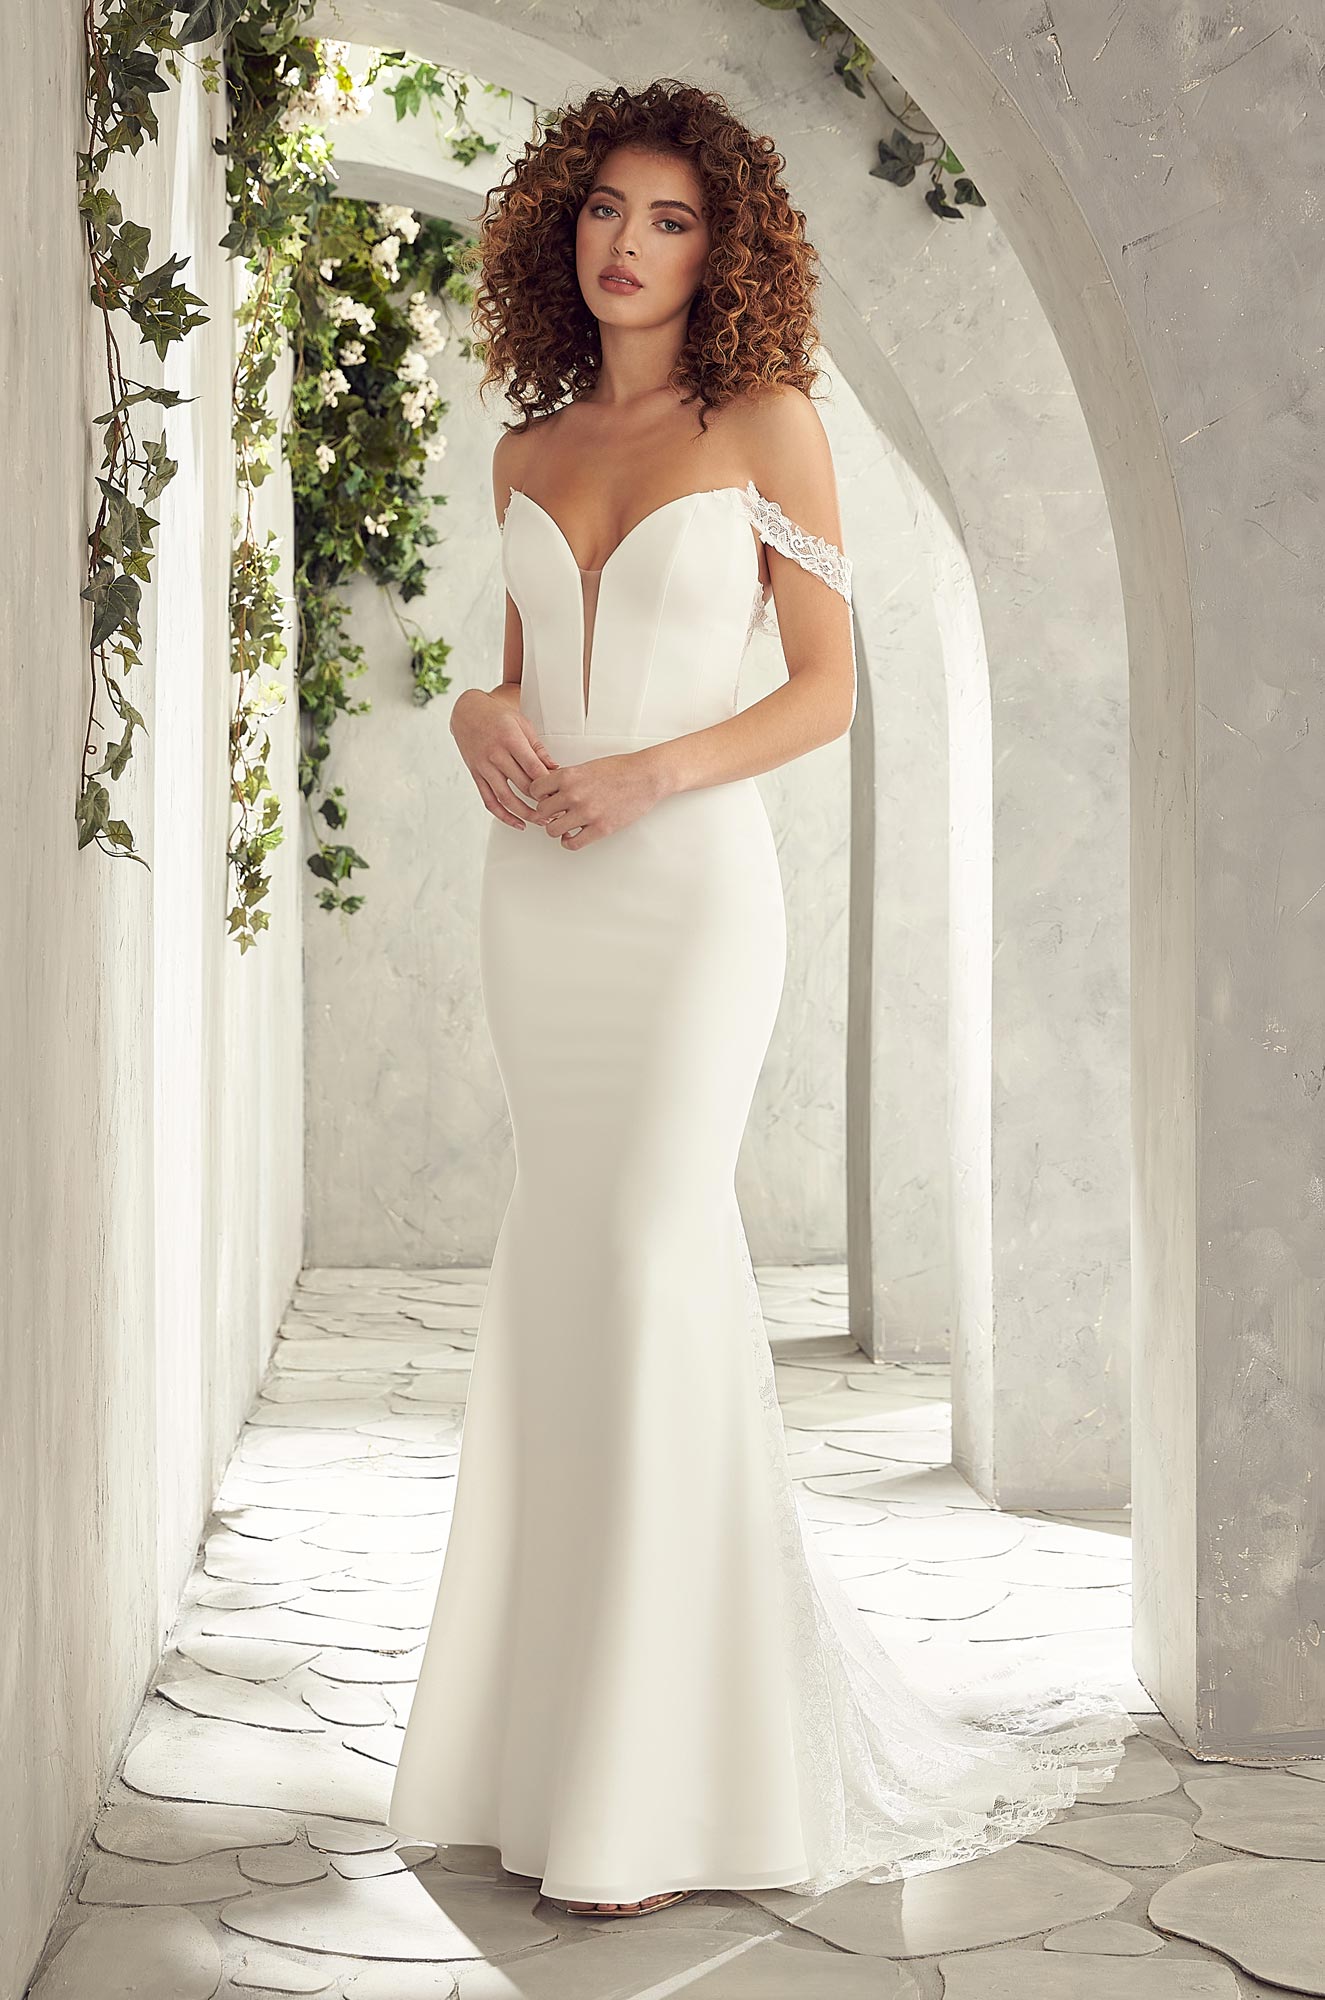 Fit And Flare Wedding Dress With Sweetheart Neckline And Back Lace Details